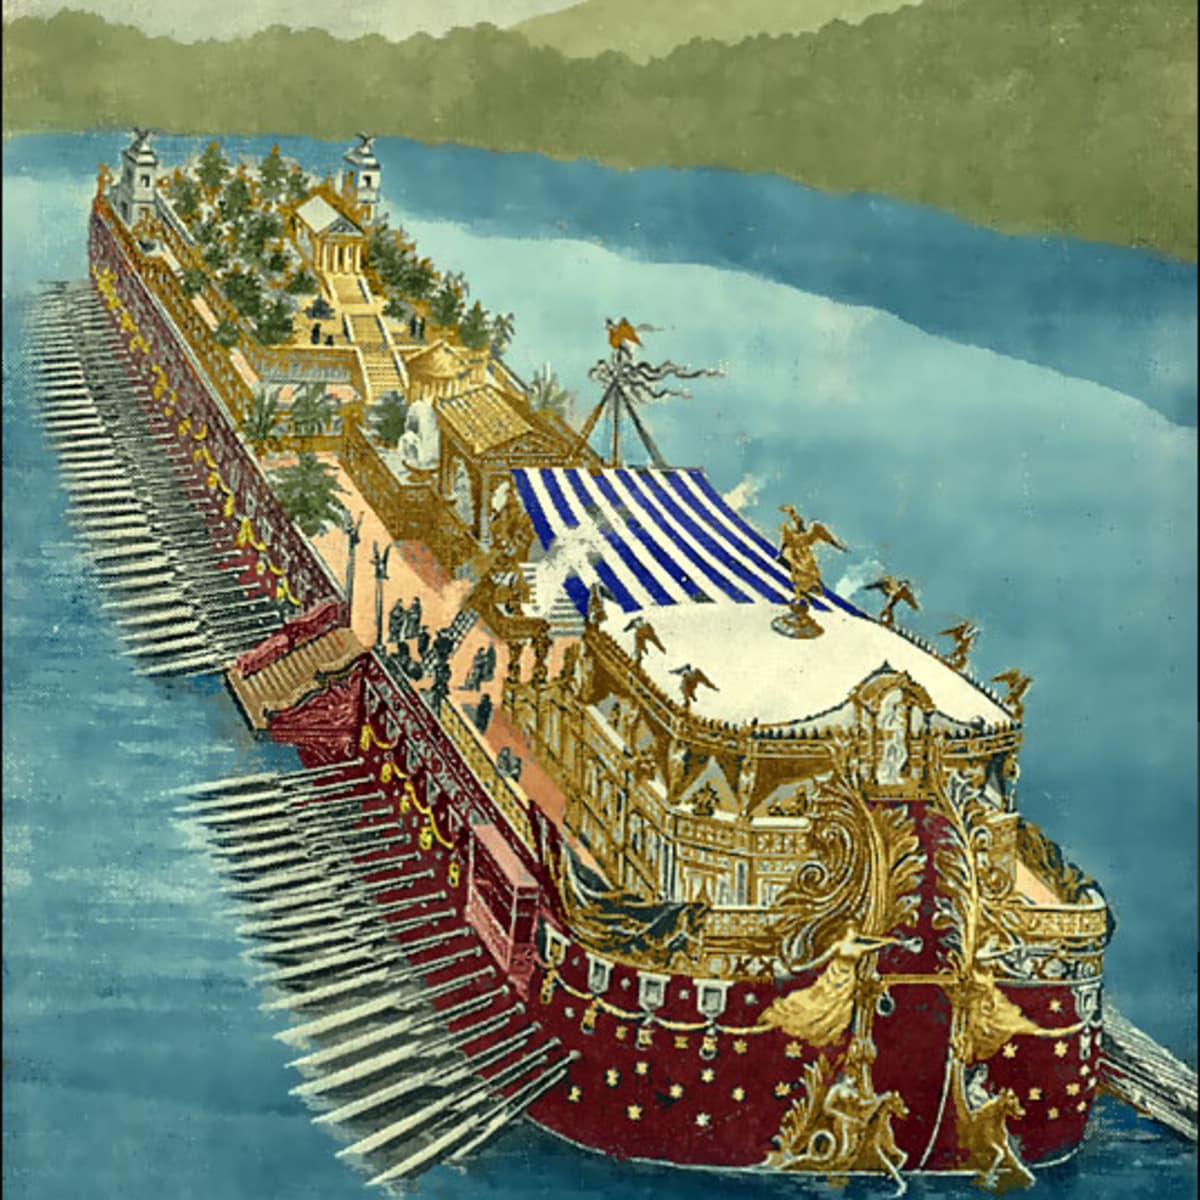 Roman Emperor Caligula and the fantastic Nemi Barges discovered at the bottom of the lake. hq nude image